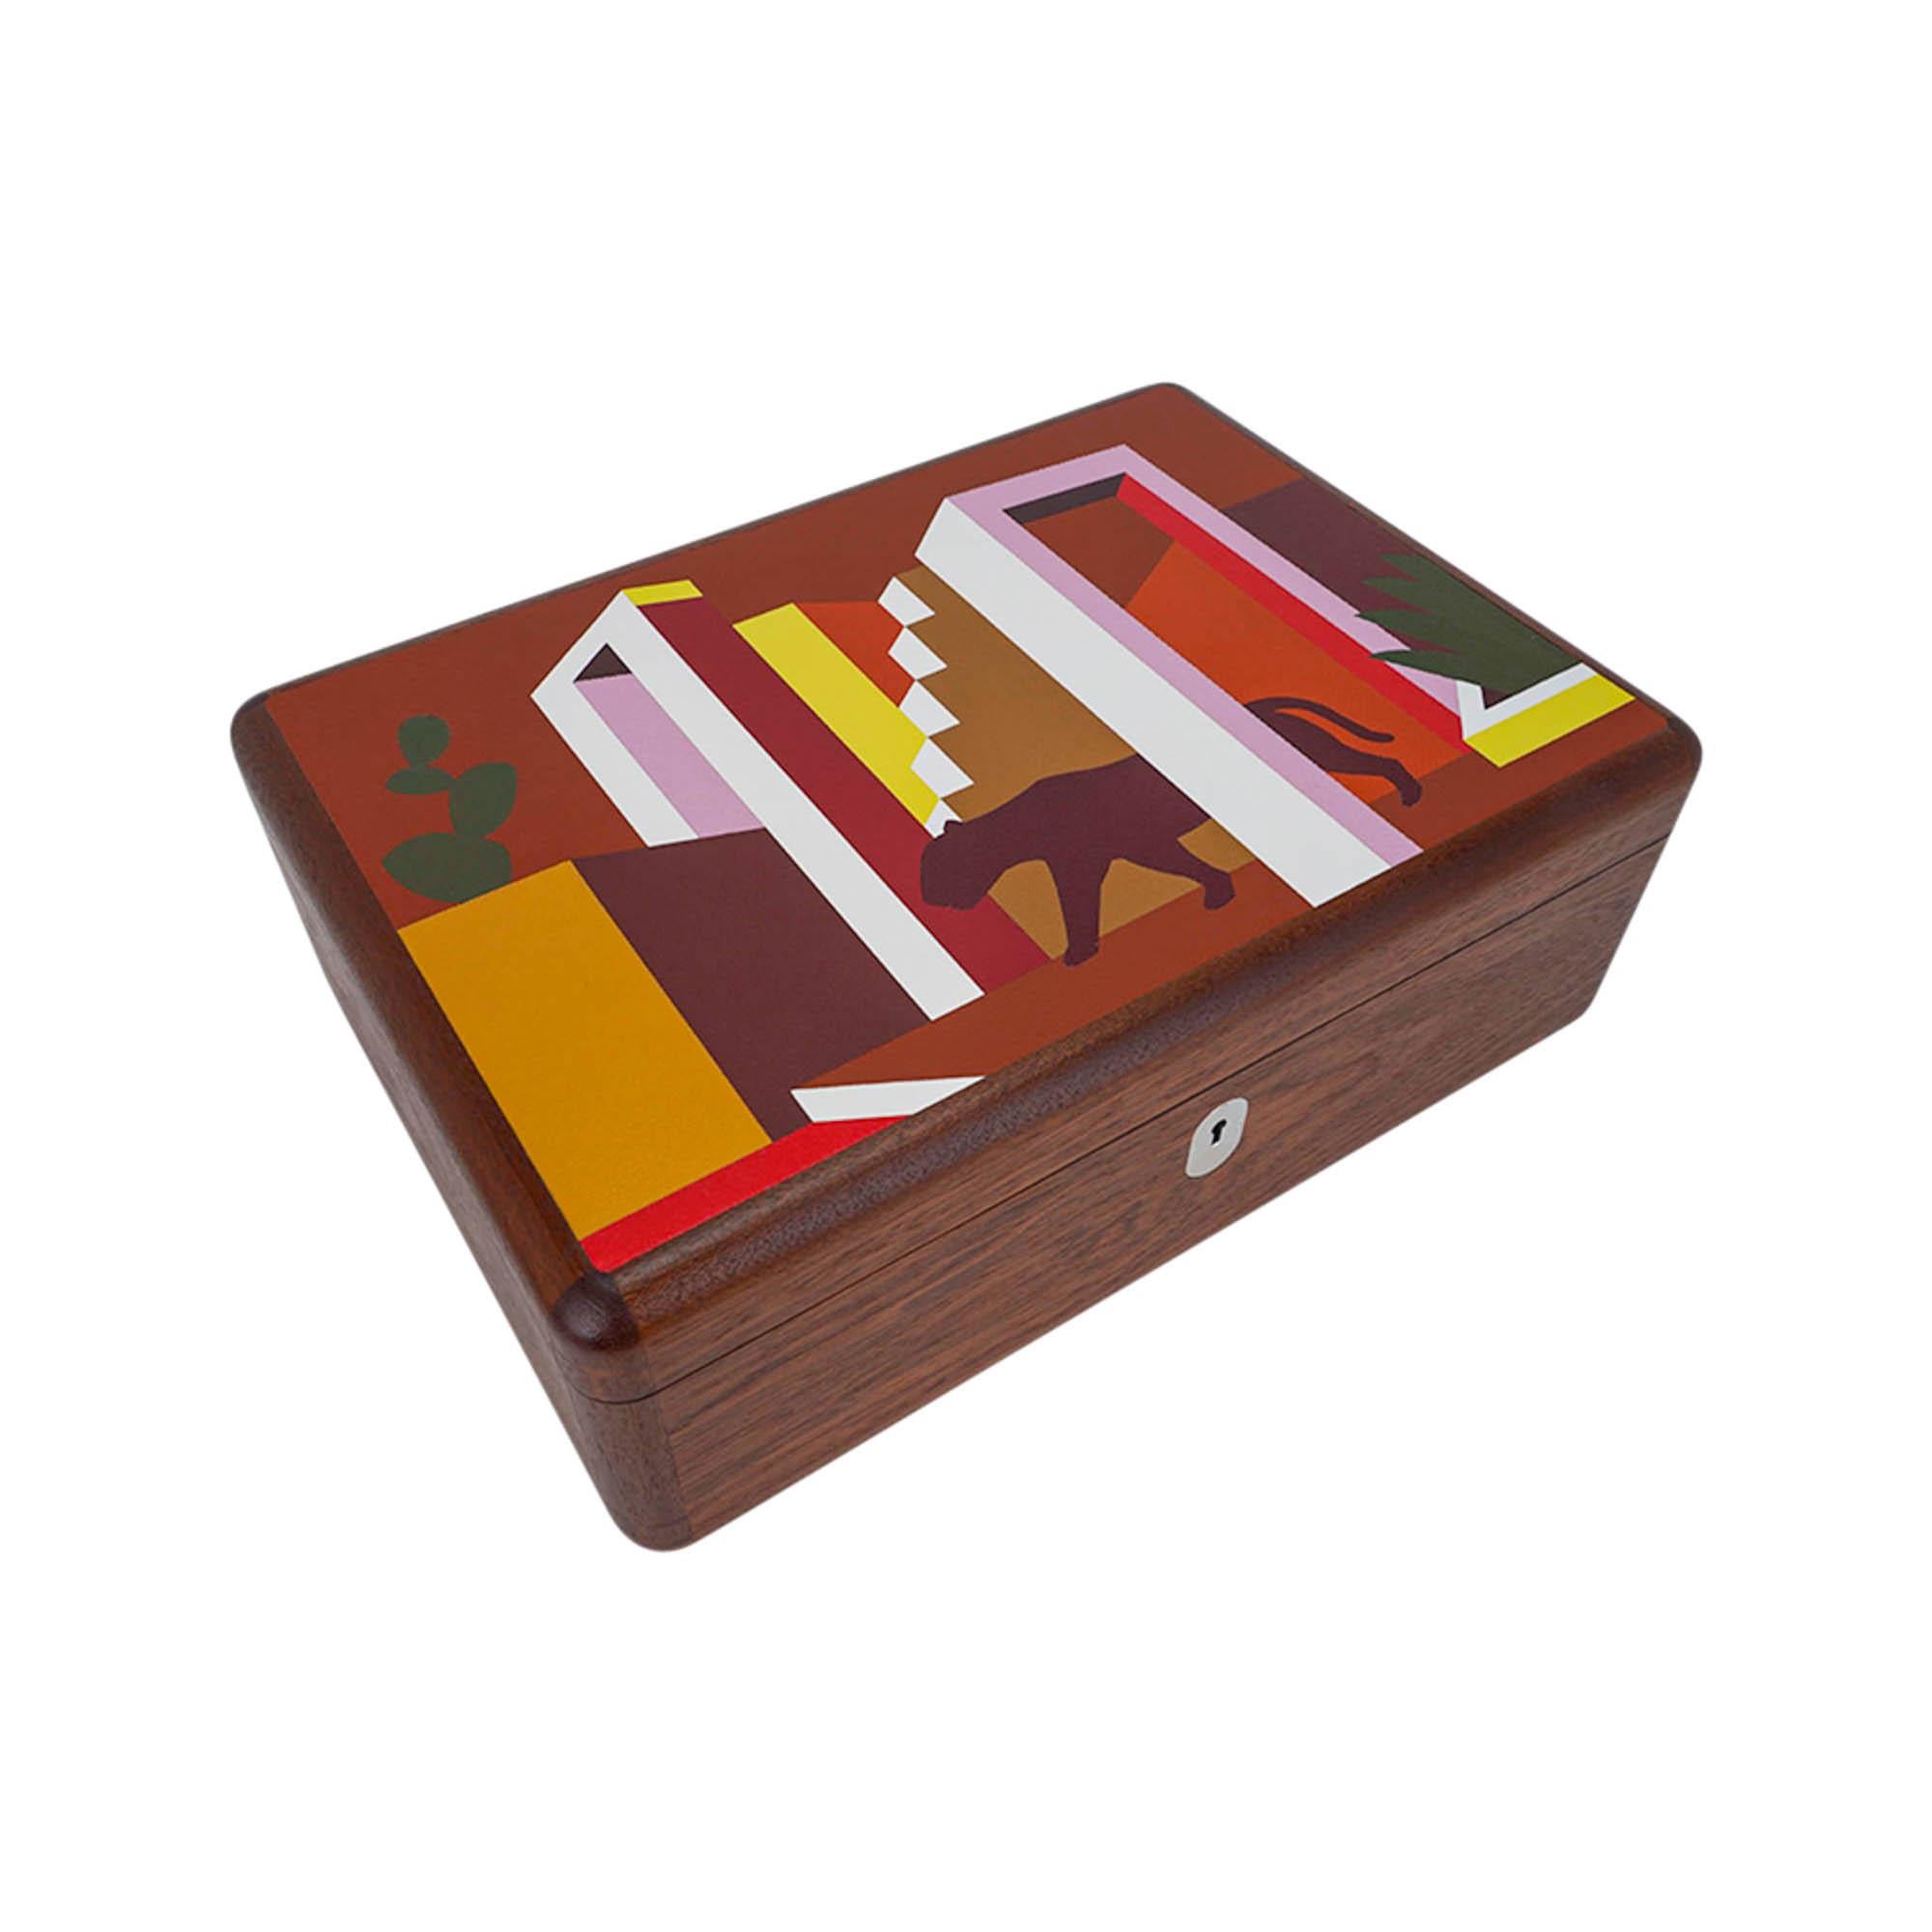 Mightychic offers an Hermes Casaque Felin Dans Un Jardin Mexicain Watch and Jewelry Box featured in Cuivre.
Beautifully showcased design by Jan Bajtlik in leather marquetry expressed in Evercolor, Epsom, Swift and goatskin .
Interior, for jewelry